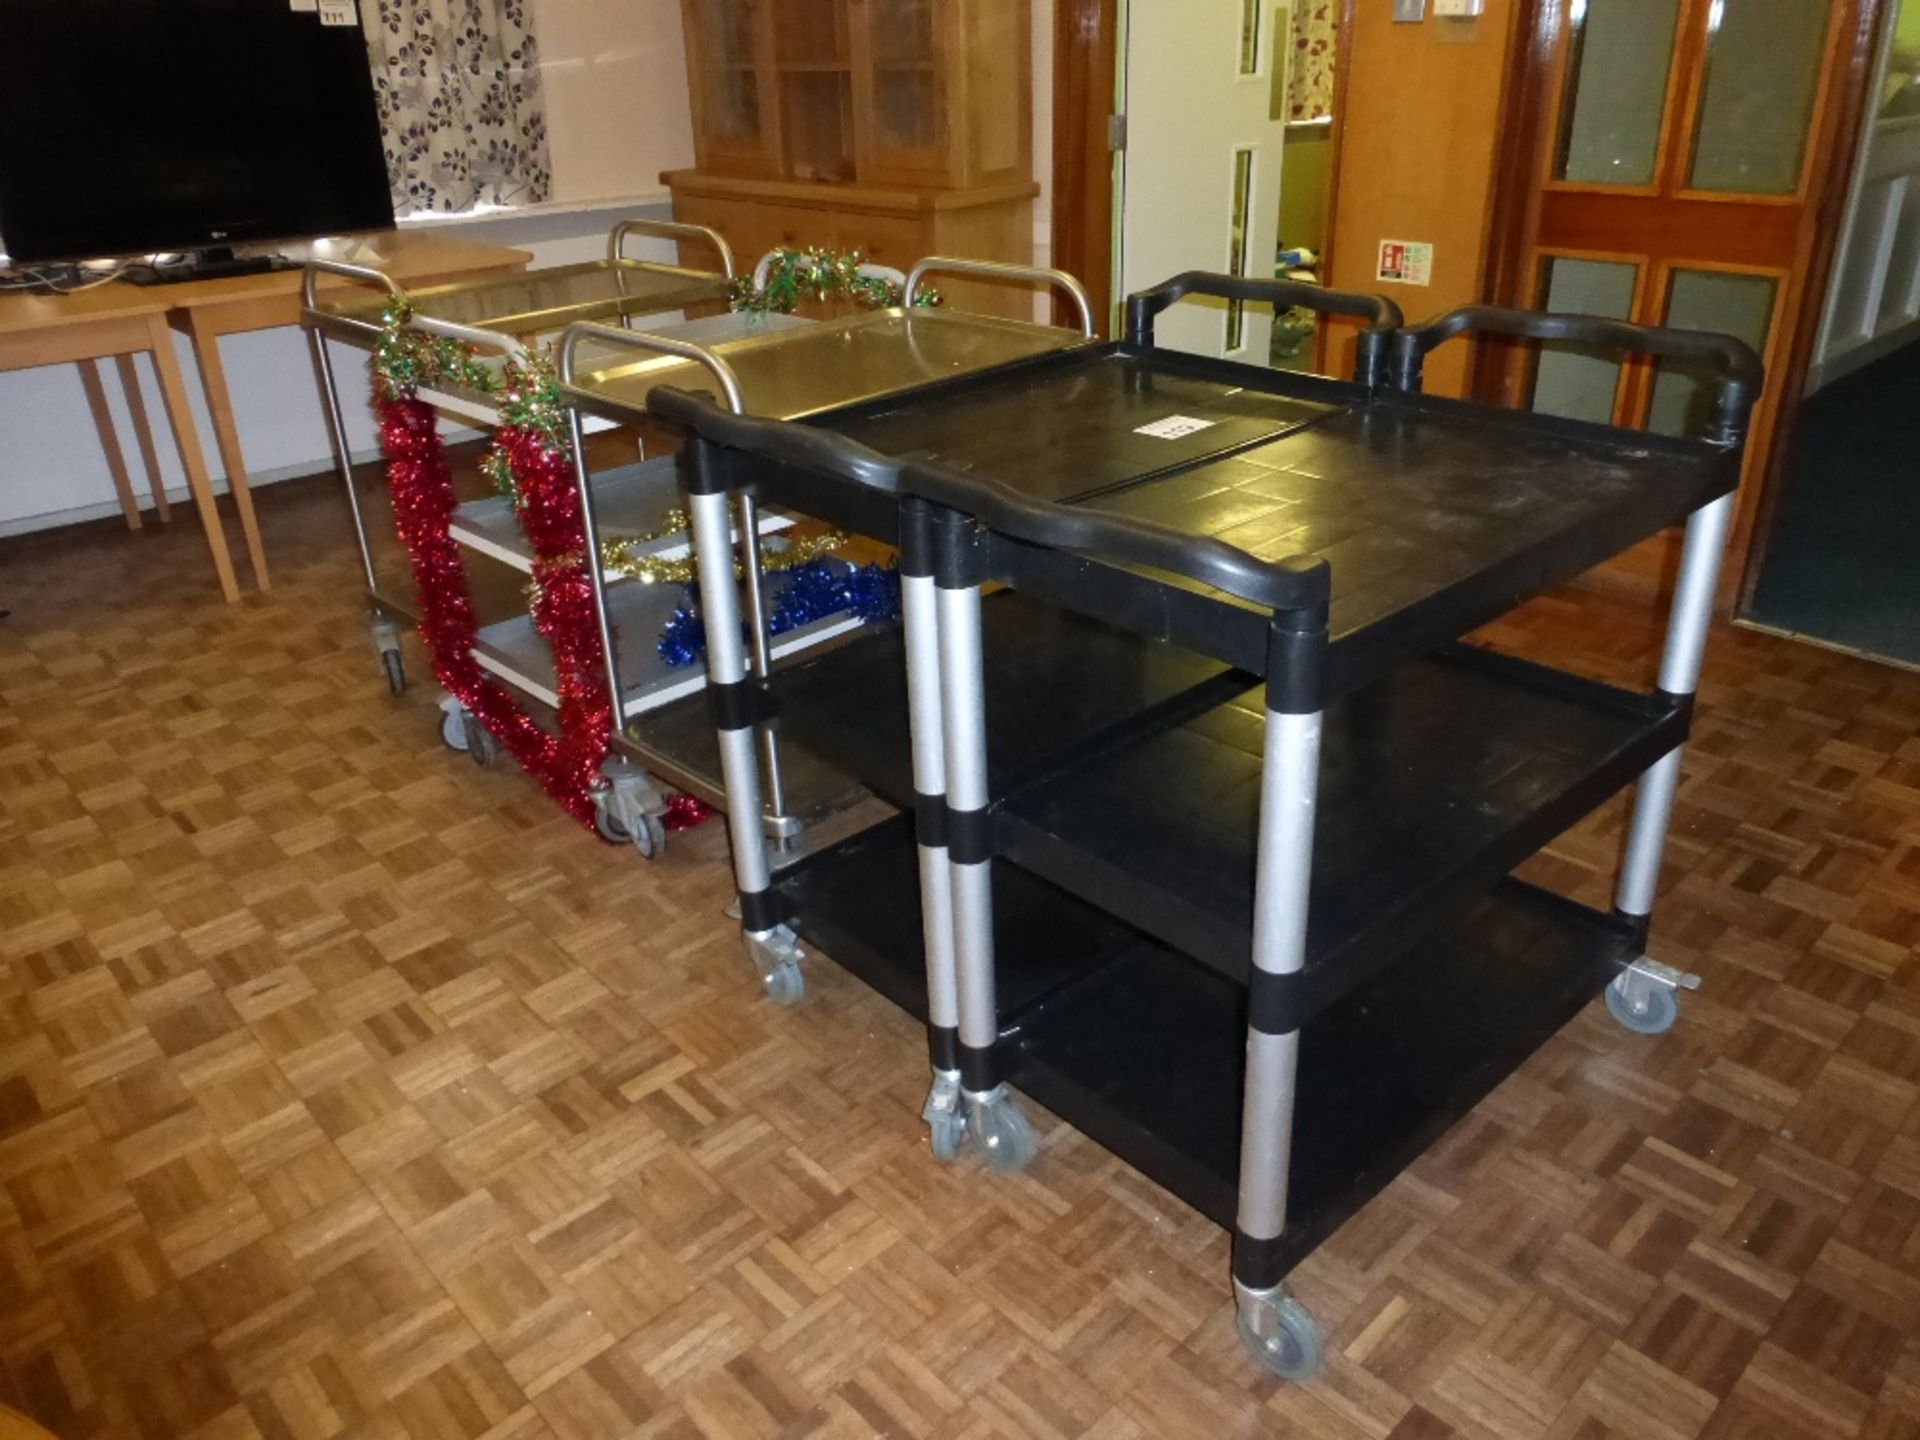 4 stainless steel three tier trolleys and 2 plastic three tier trolleys (located in room 36)